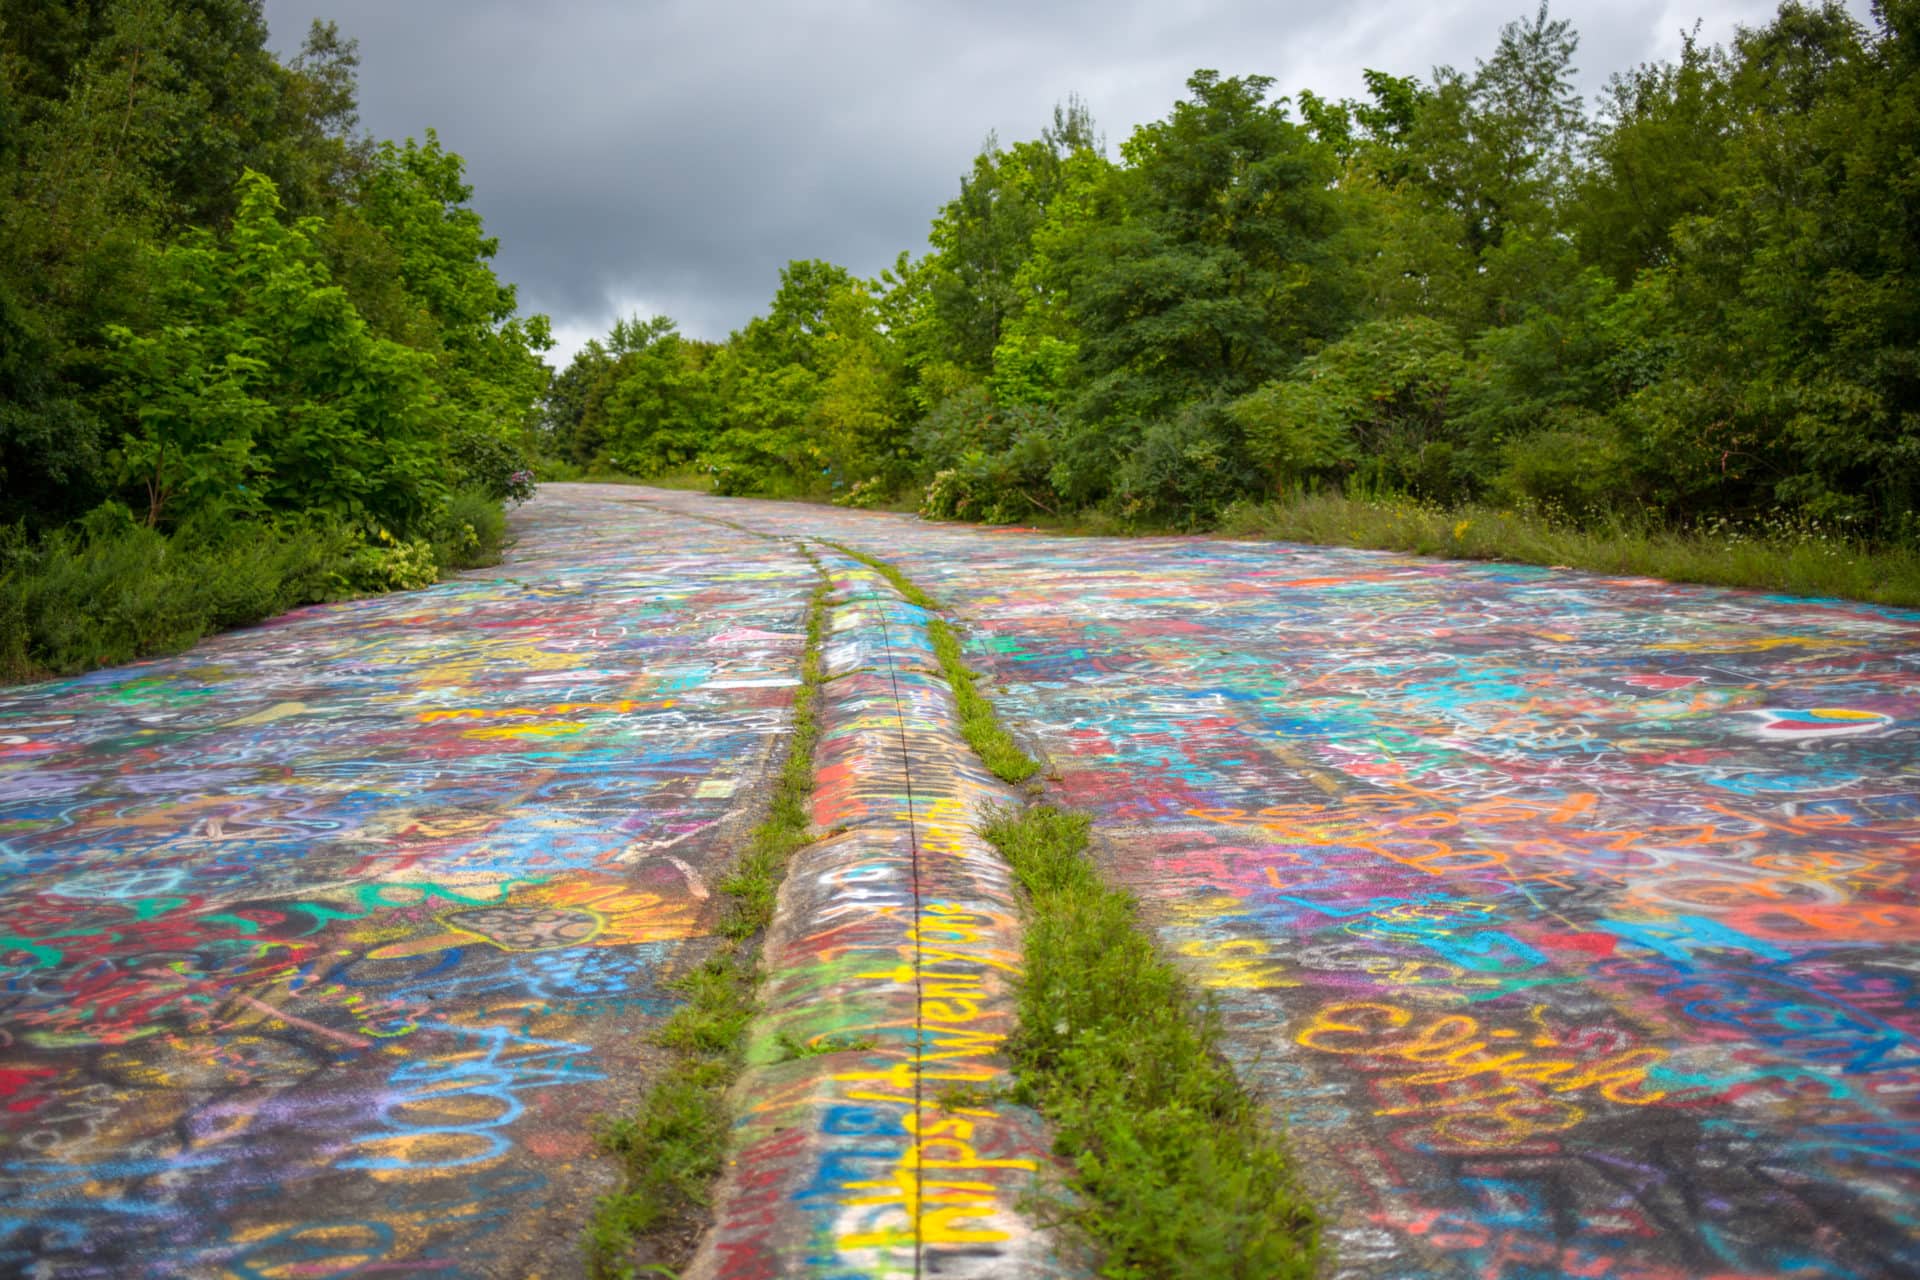 The graffiti highway is less than a mile long.